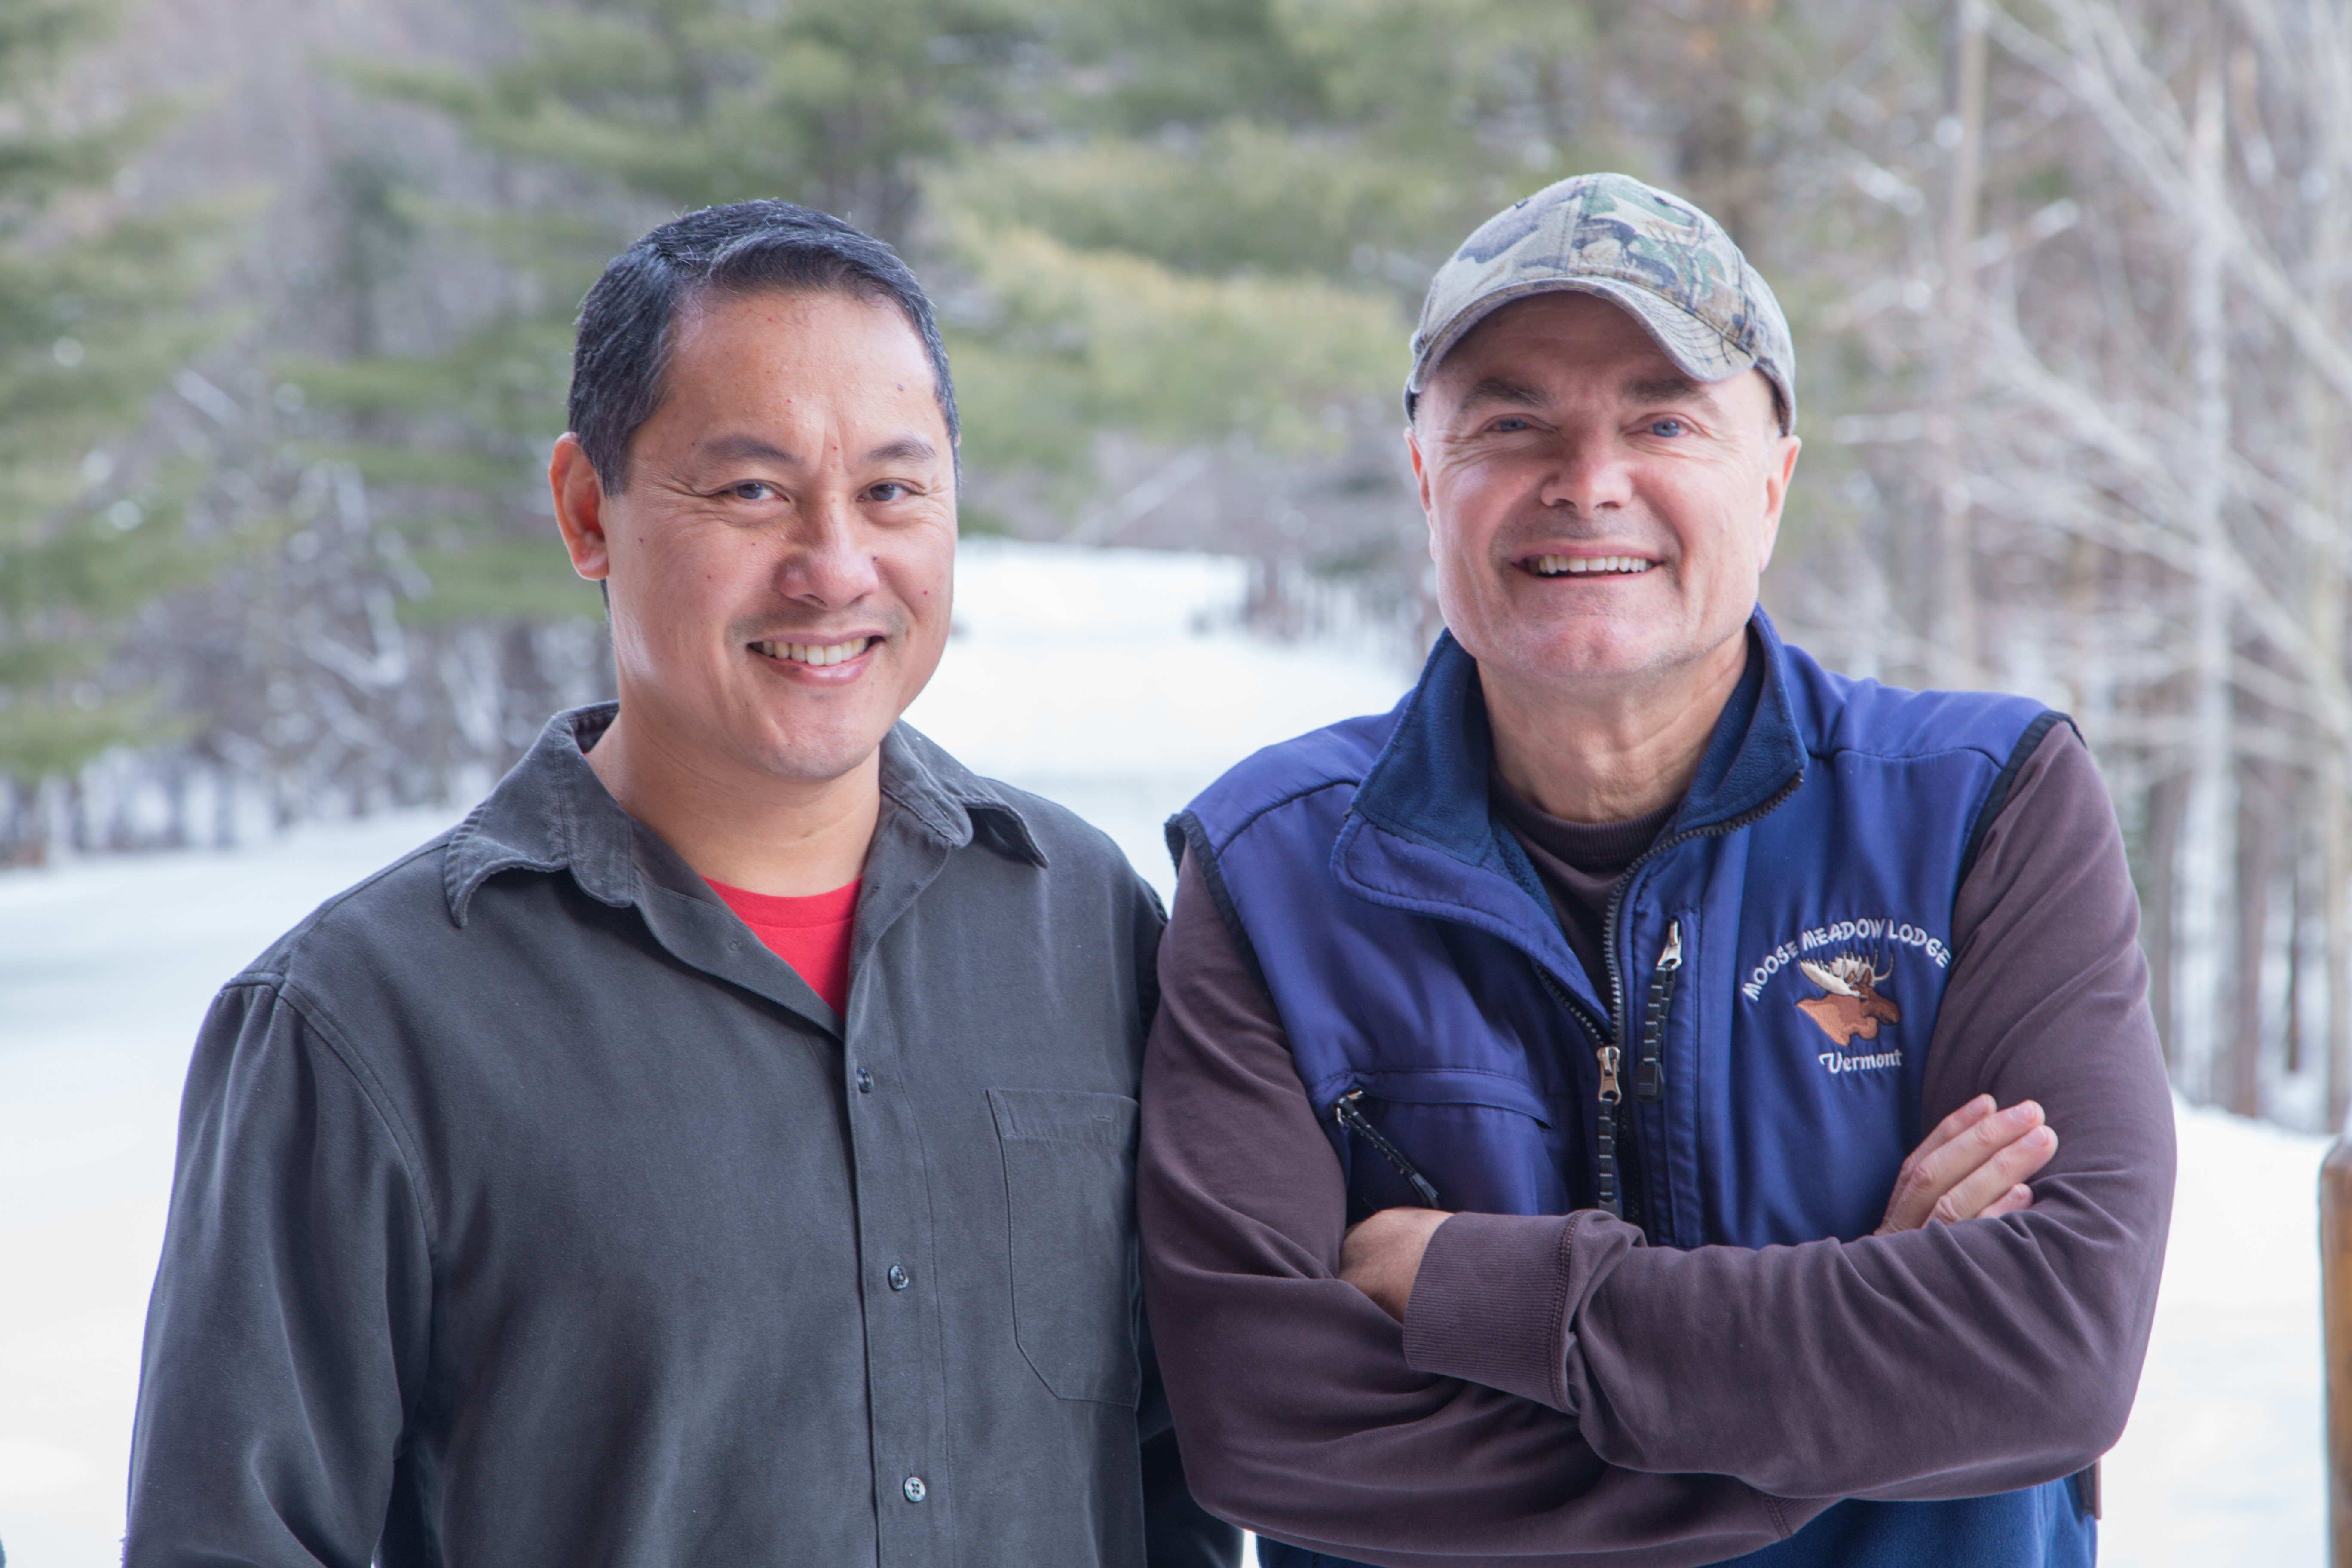 Moose Meadow Lodge Innkeepers - Willie Docto and Greg Trulson